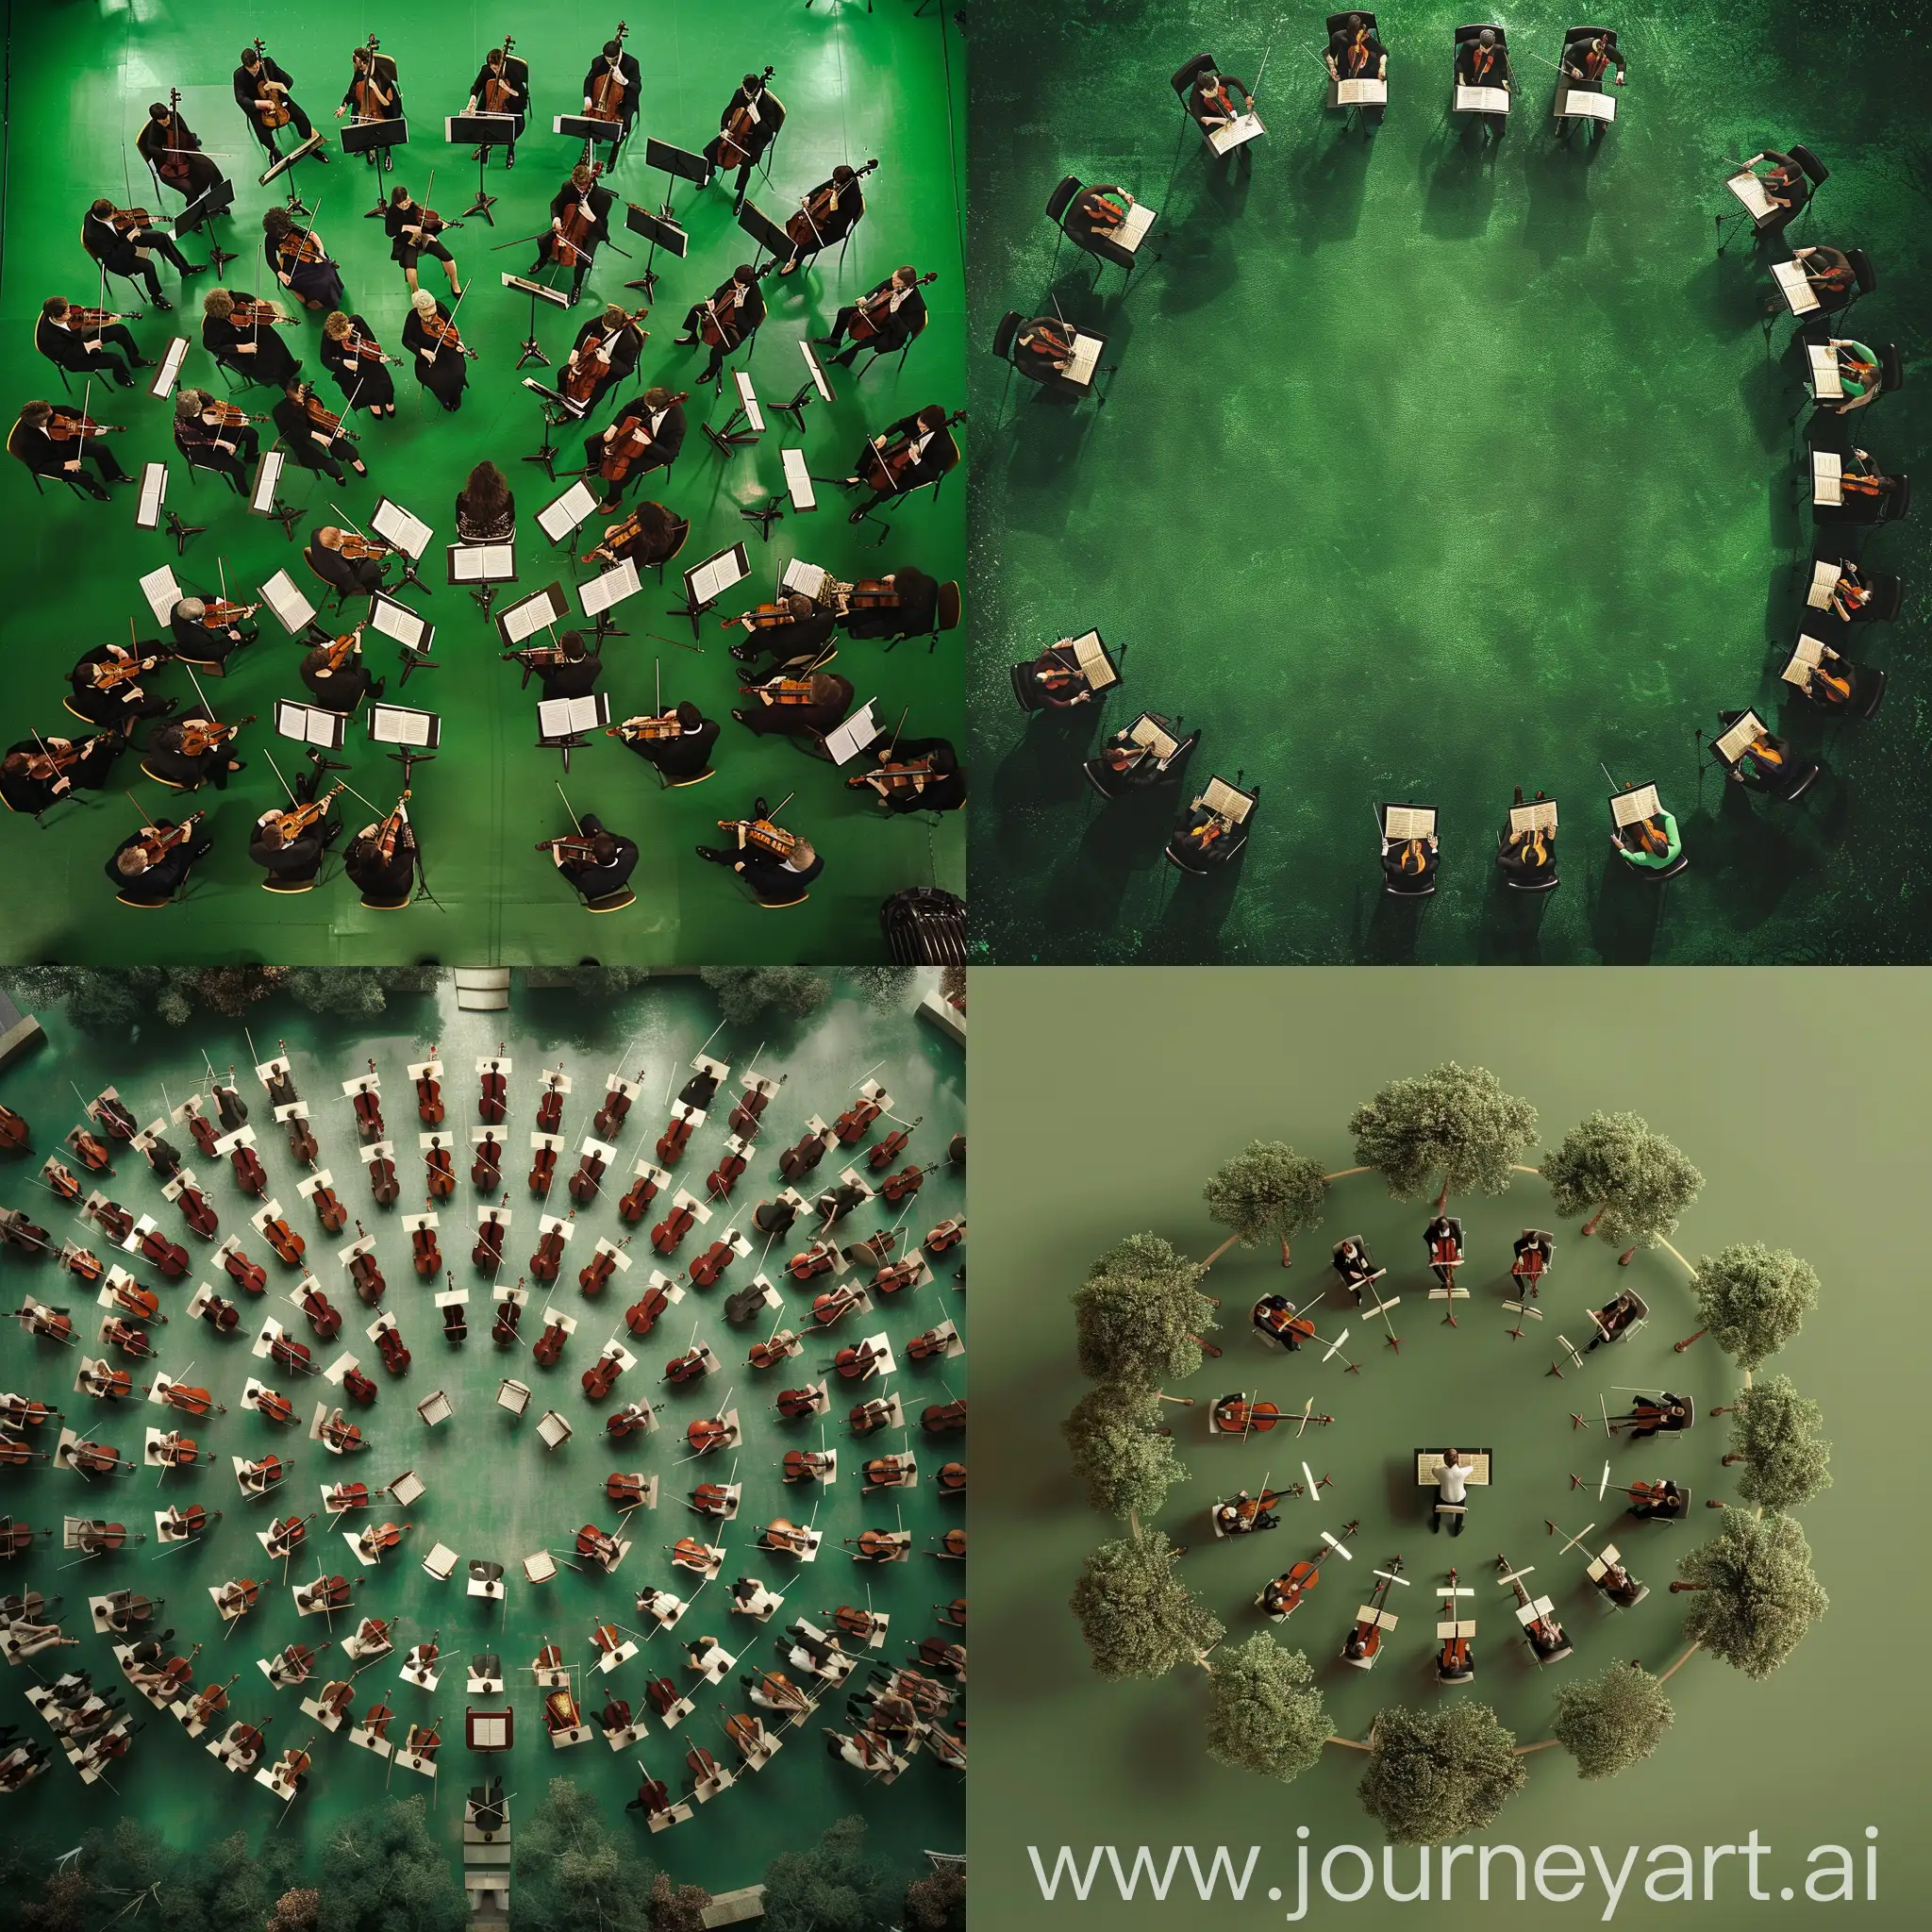 Realistic-Aerial-View-of-Orchestra-Performing-in-Green-Setting